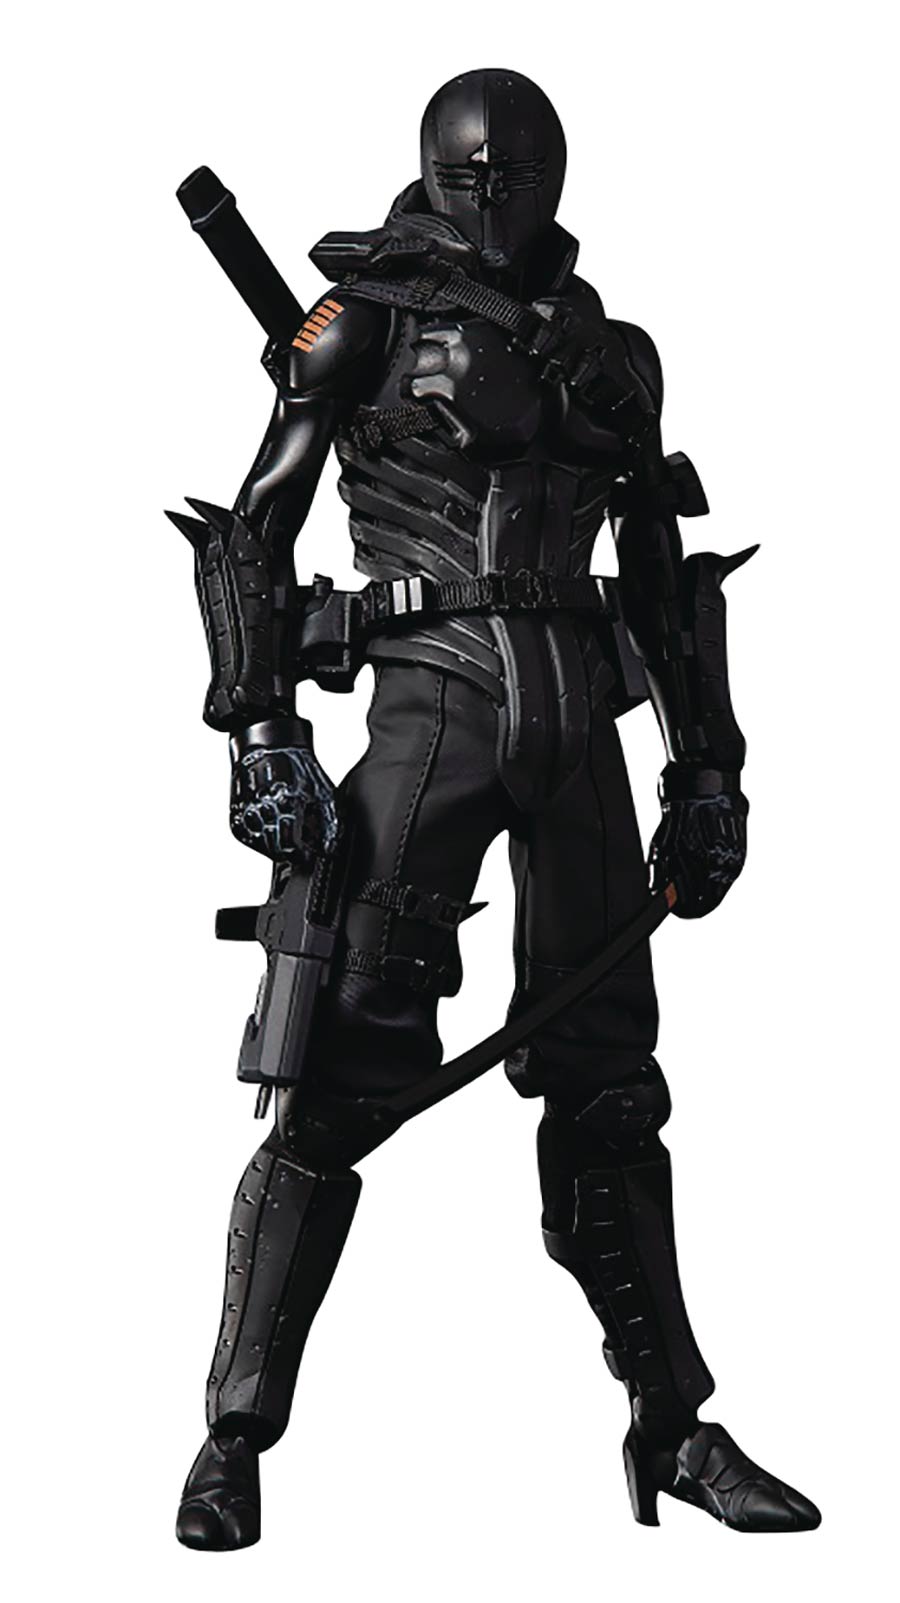 GI Joe x Toa Heavy Industries Snake Eyes Previews Exclusive 1/6 Scale Action Figure